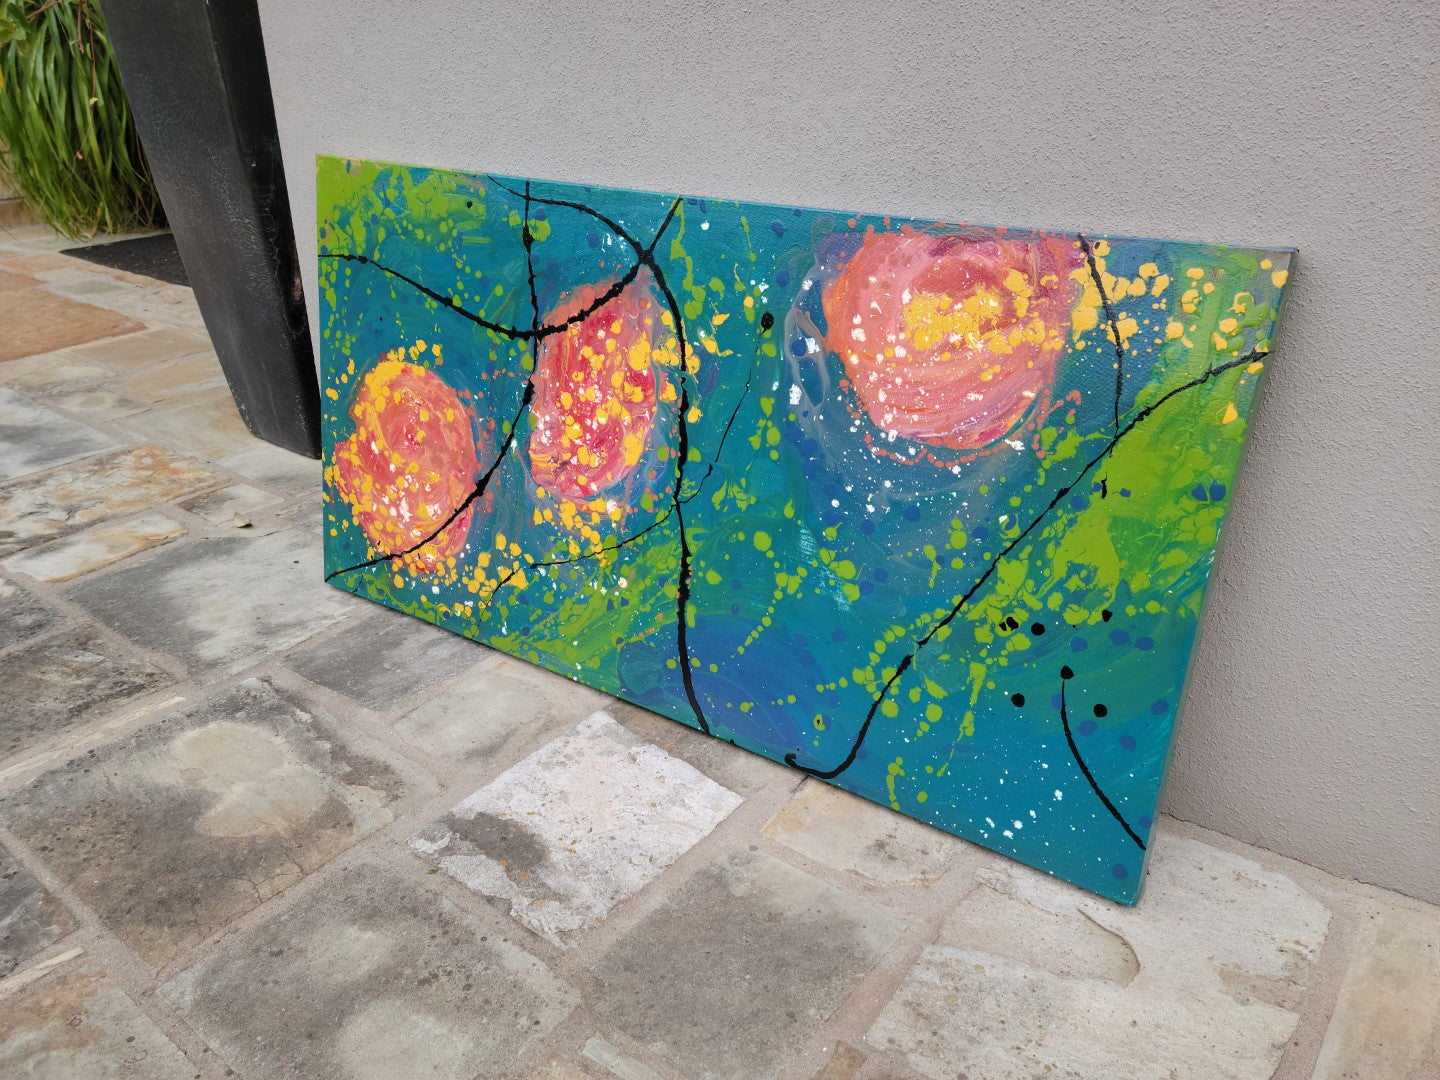 Hysterical Harassment - Original Abstract Painting in Austin Texas 24" x 48"